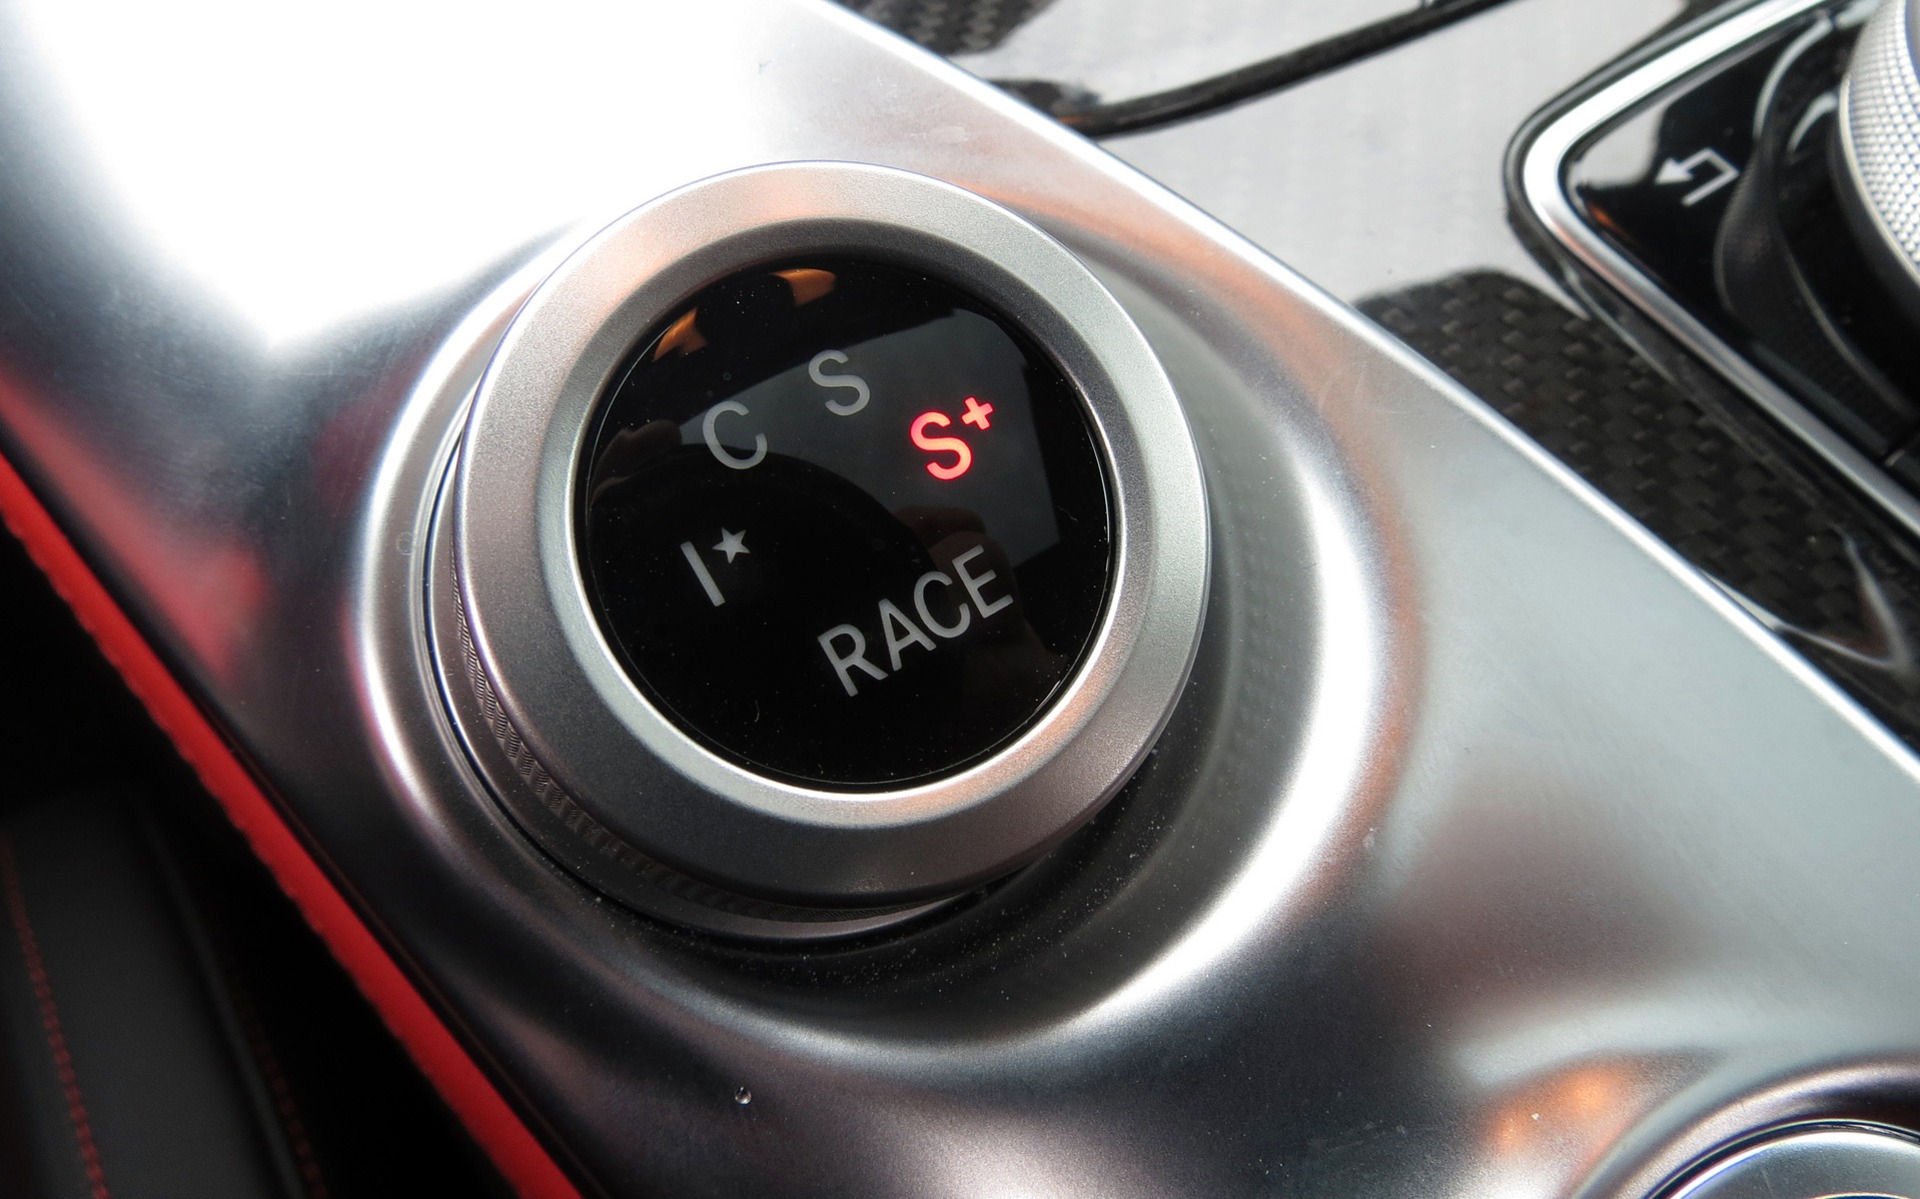 You can choose between 5 different driving modes using this wheel.